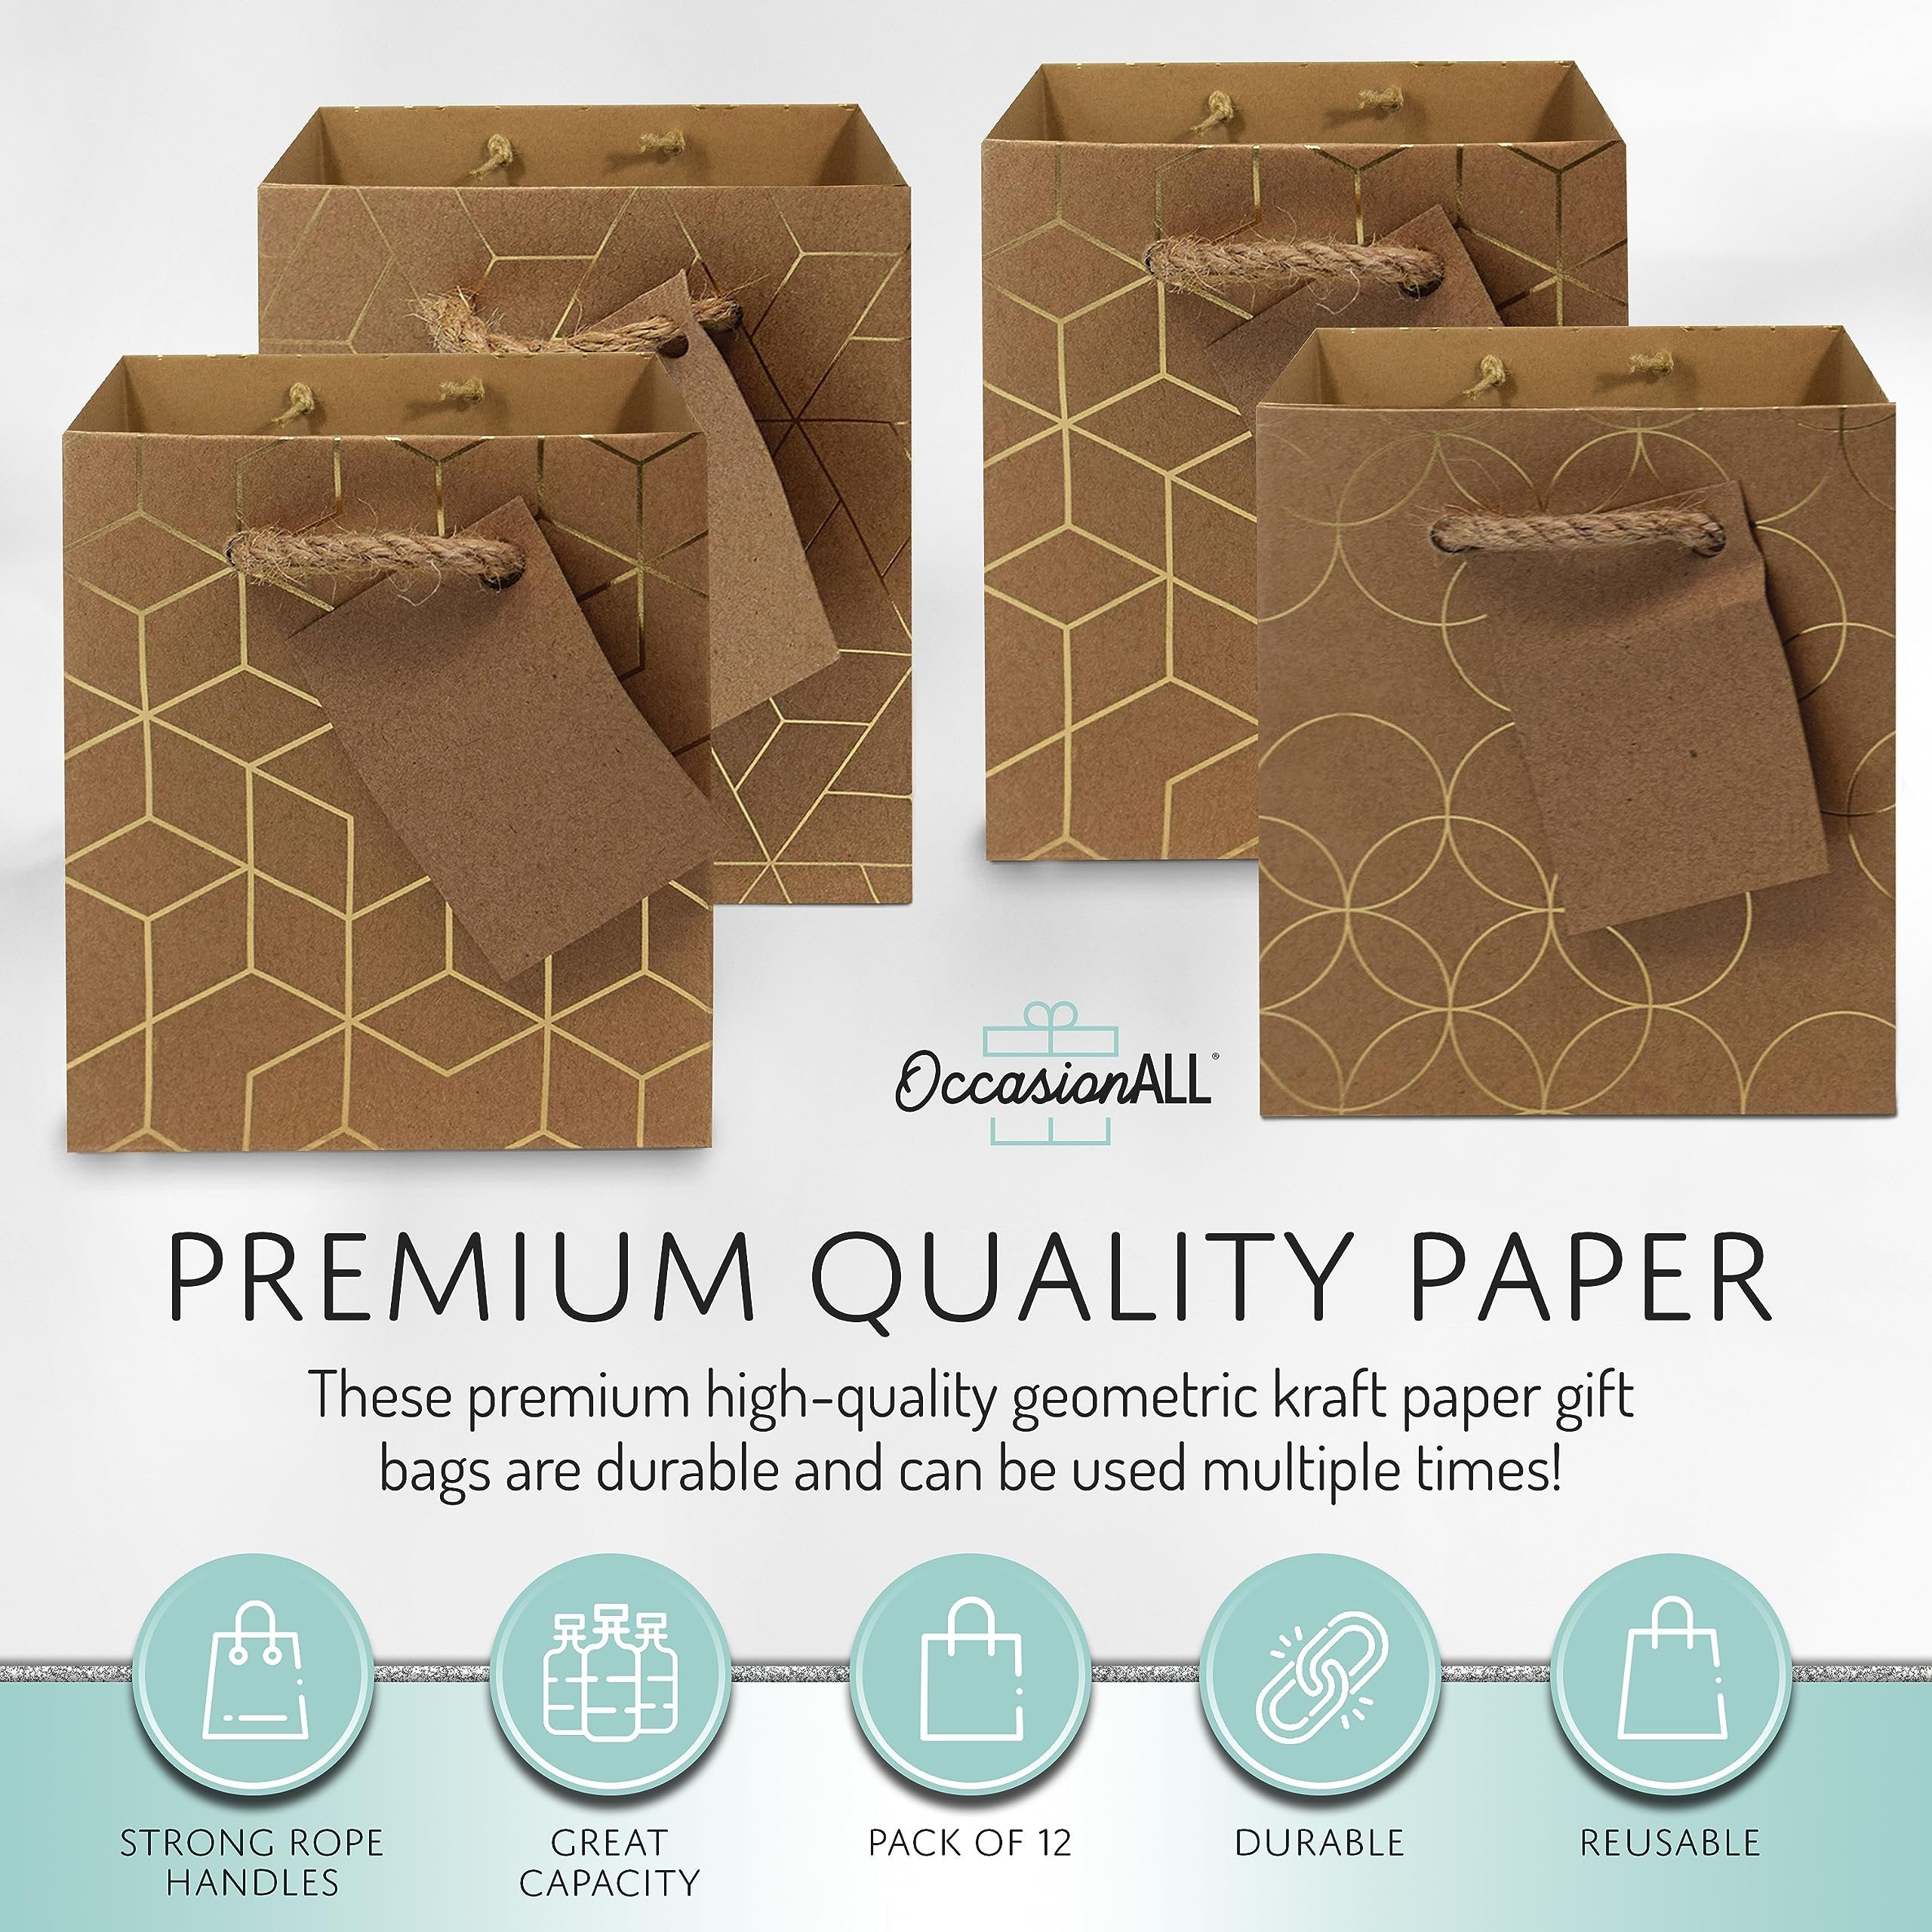 Gold Gift Bags - 12 Pack Small Geometric Prints Kraft Paper Shopping Bags with Handles, Gift Wrap Euro Totes for Birthday Parties, Bachelorette, Baby Showers, Holidays, Christmas, Bulk - 6x3x7.5